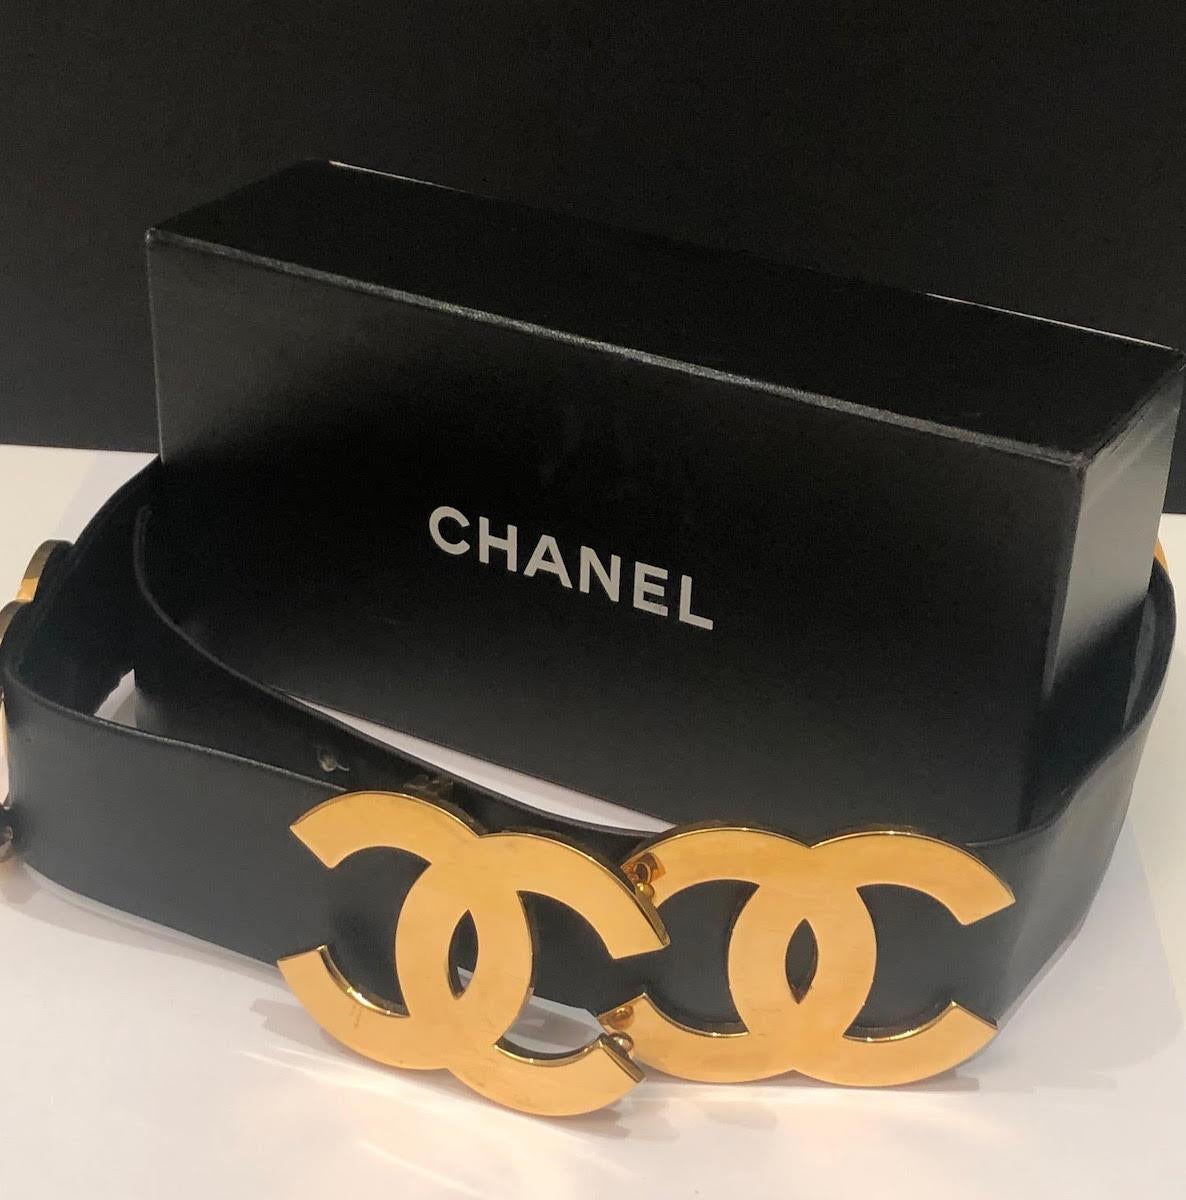 A super rare, iconic CHANEL belt with large CC gold tone logos. This iconic black leather CC logo belt was featured during the 1992 Fall/Winter Ready-To-Wear/Prêt-à-Porter for ‘The Leather Look’ collection. It is handcrafted with a very thick and